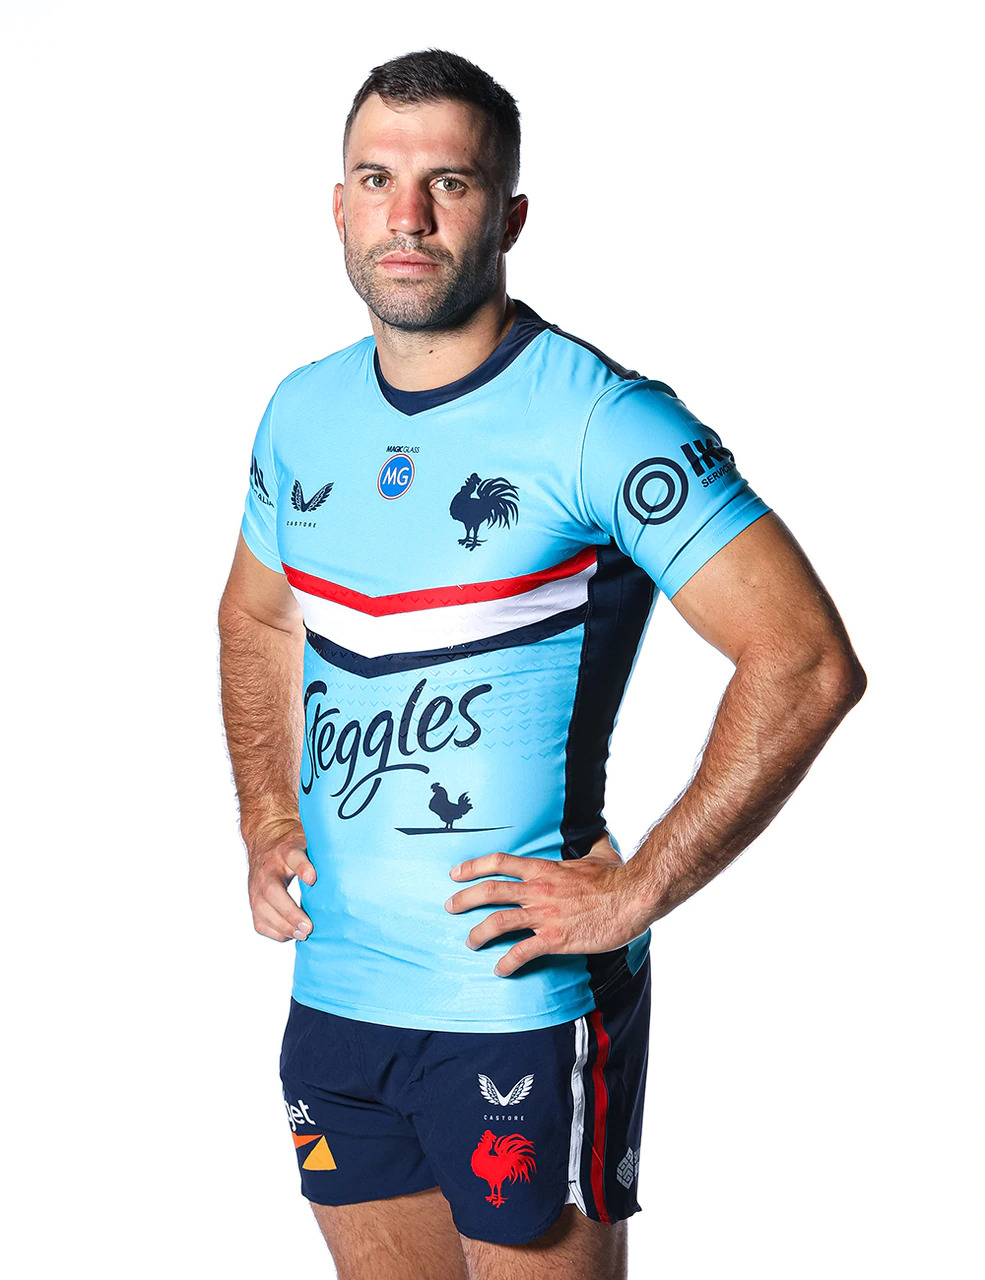 Sydney Roosters NRL 2021 Castore Indigenous Jersey Sizes S-5XL! 